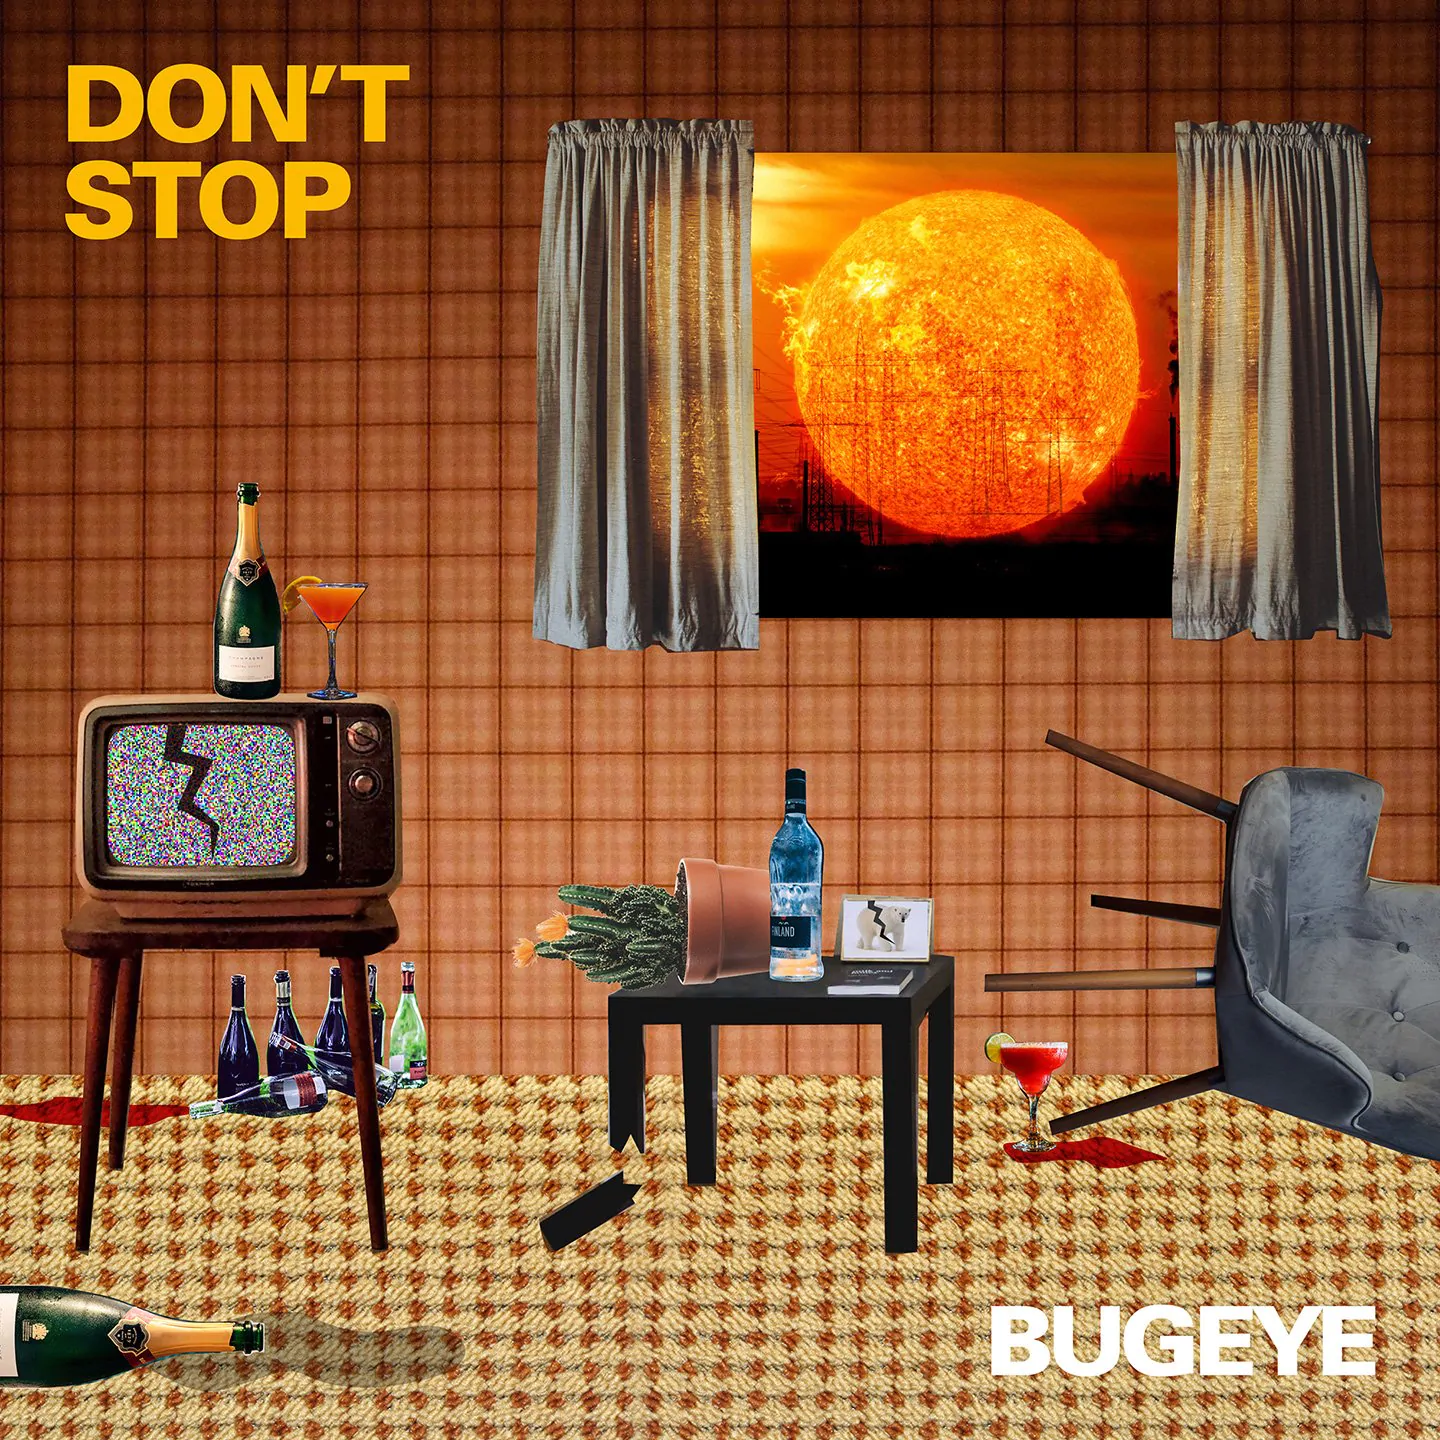 TRACK PREMIERE: Bugeye – ‘Don’t Stop’